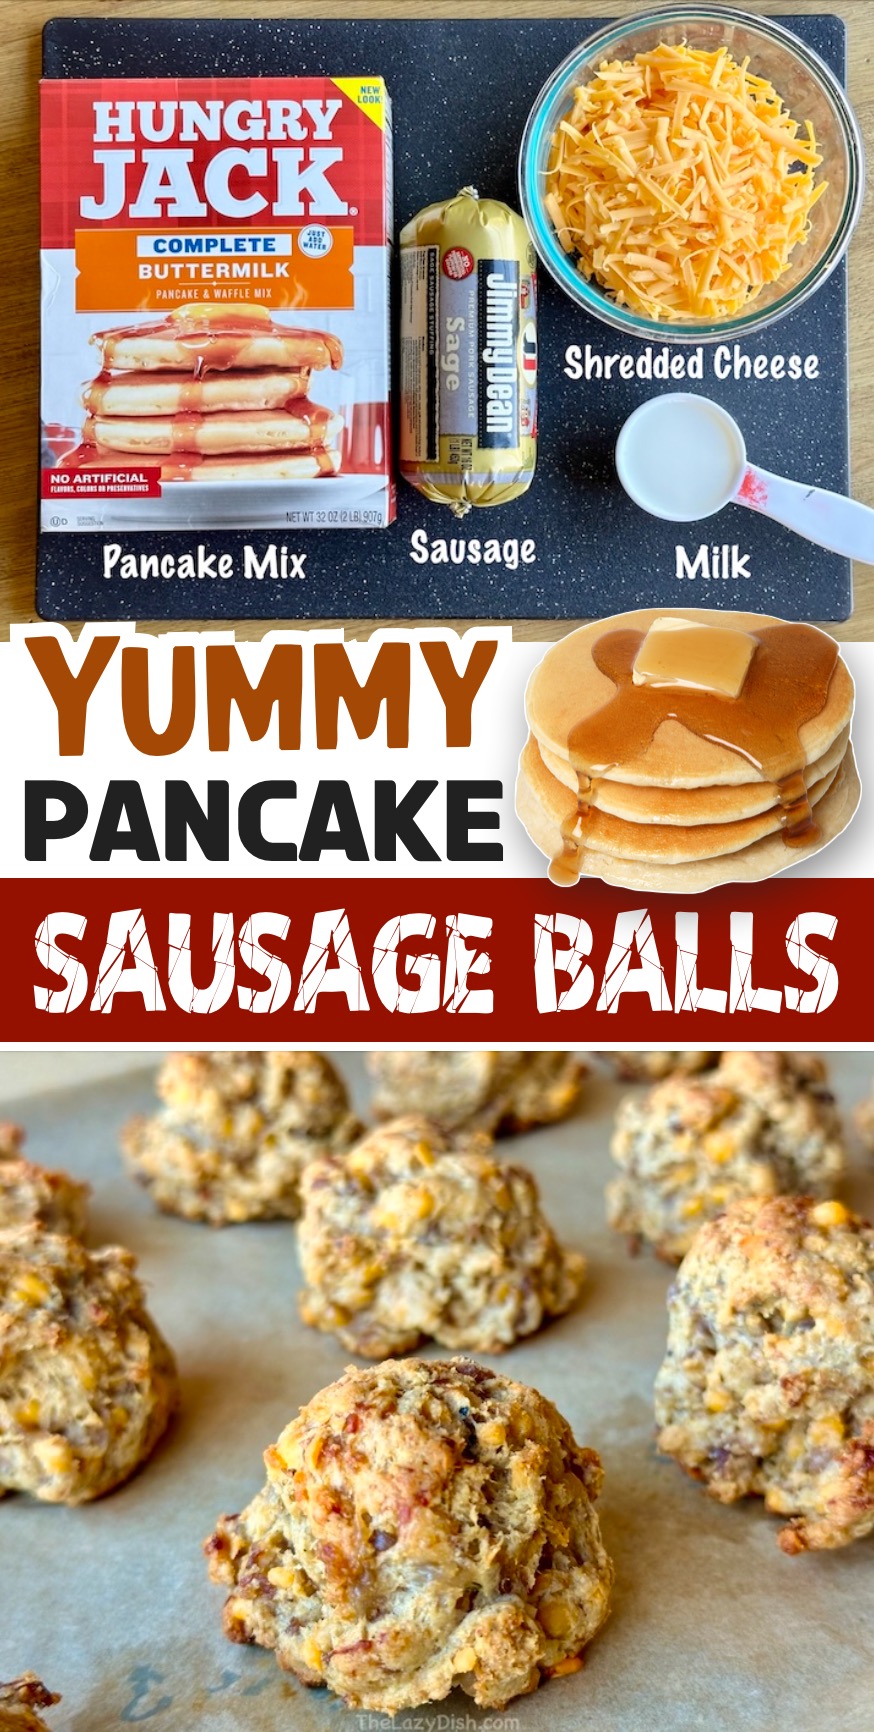 Are you looking for yummy breakfast ideas to make at home? Try these Pancake Sausage Balls! They are cheap and easy to make with just 4 basic ingredients.